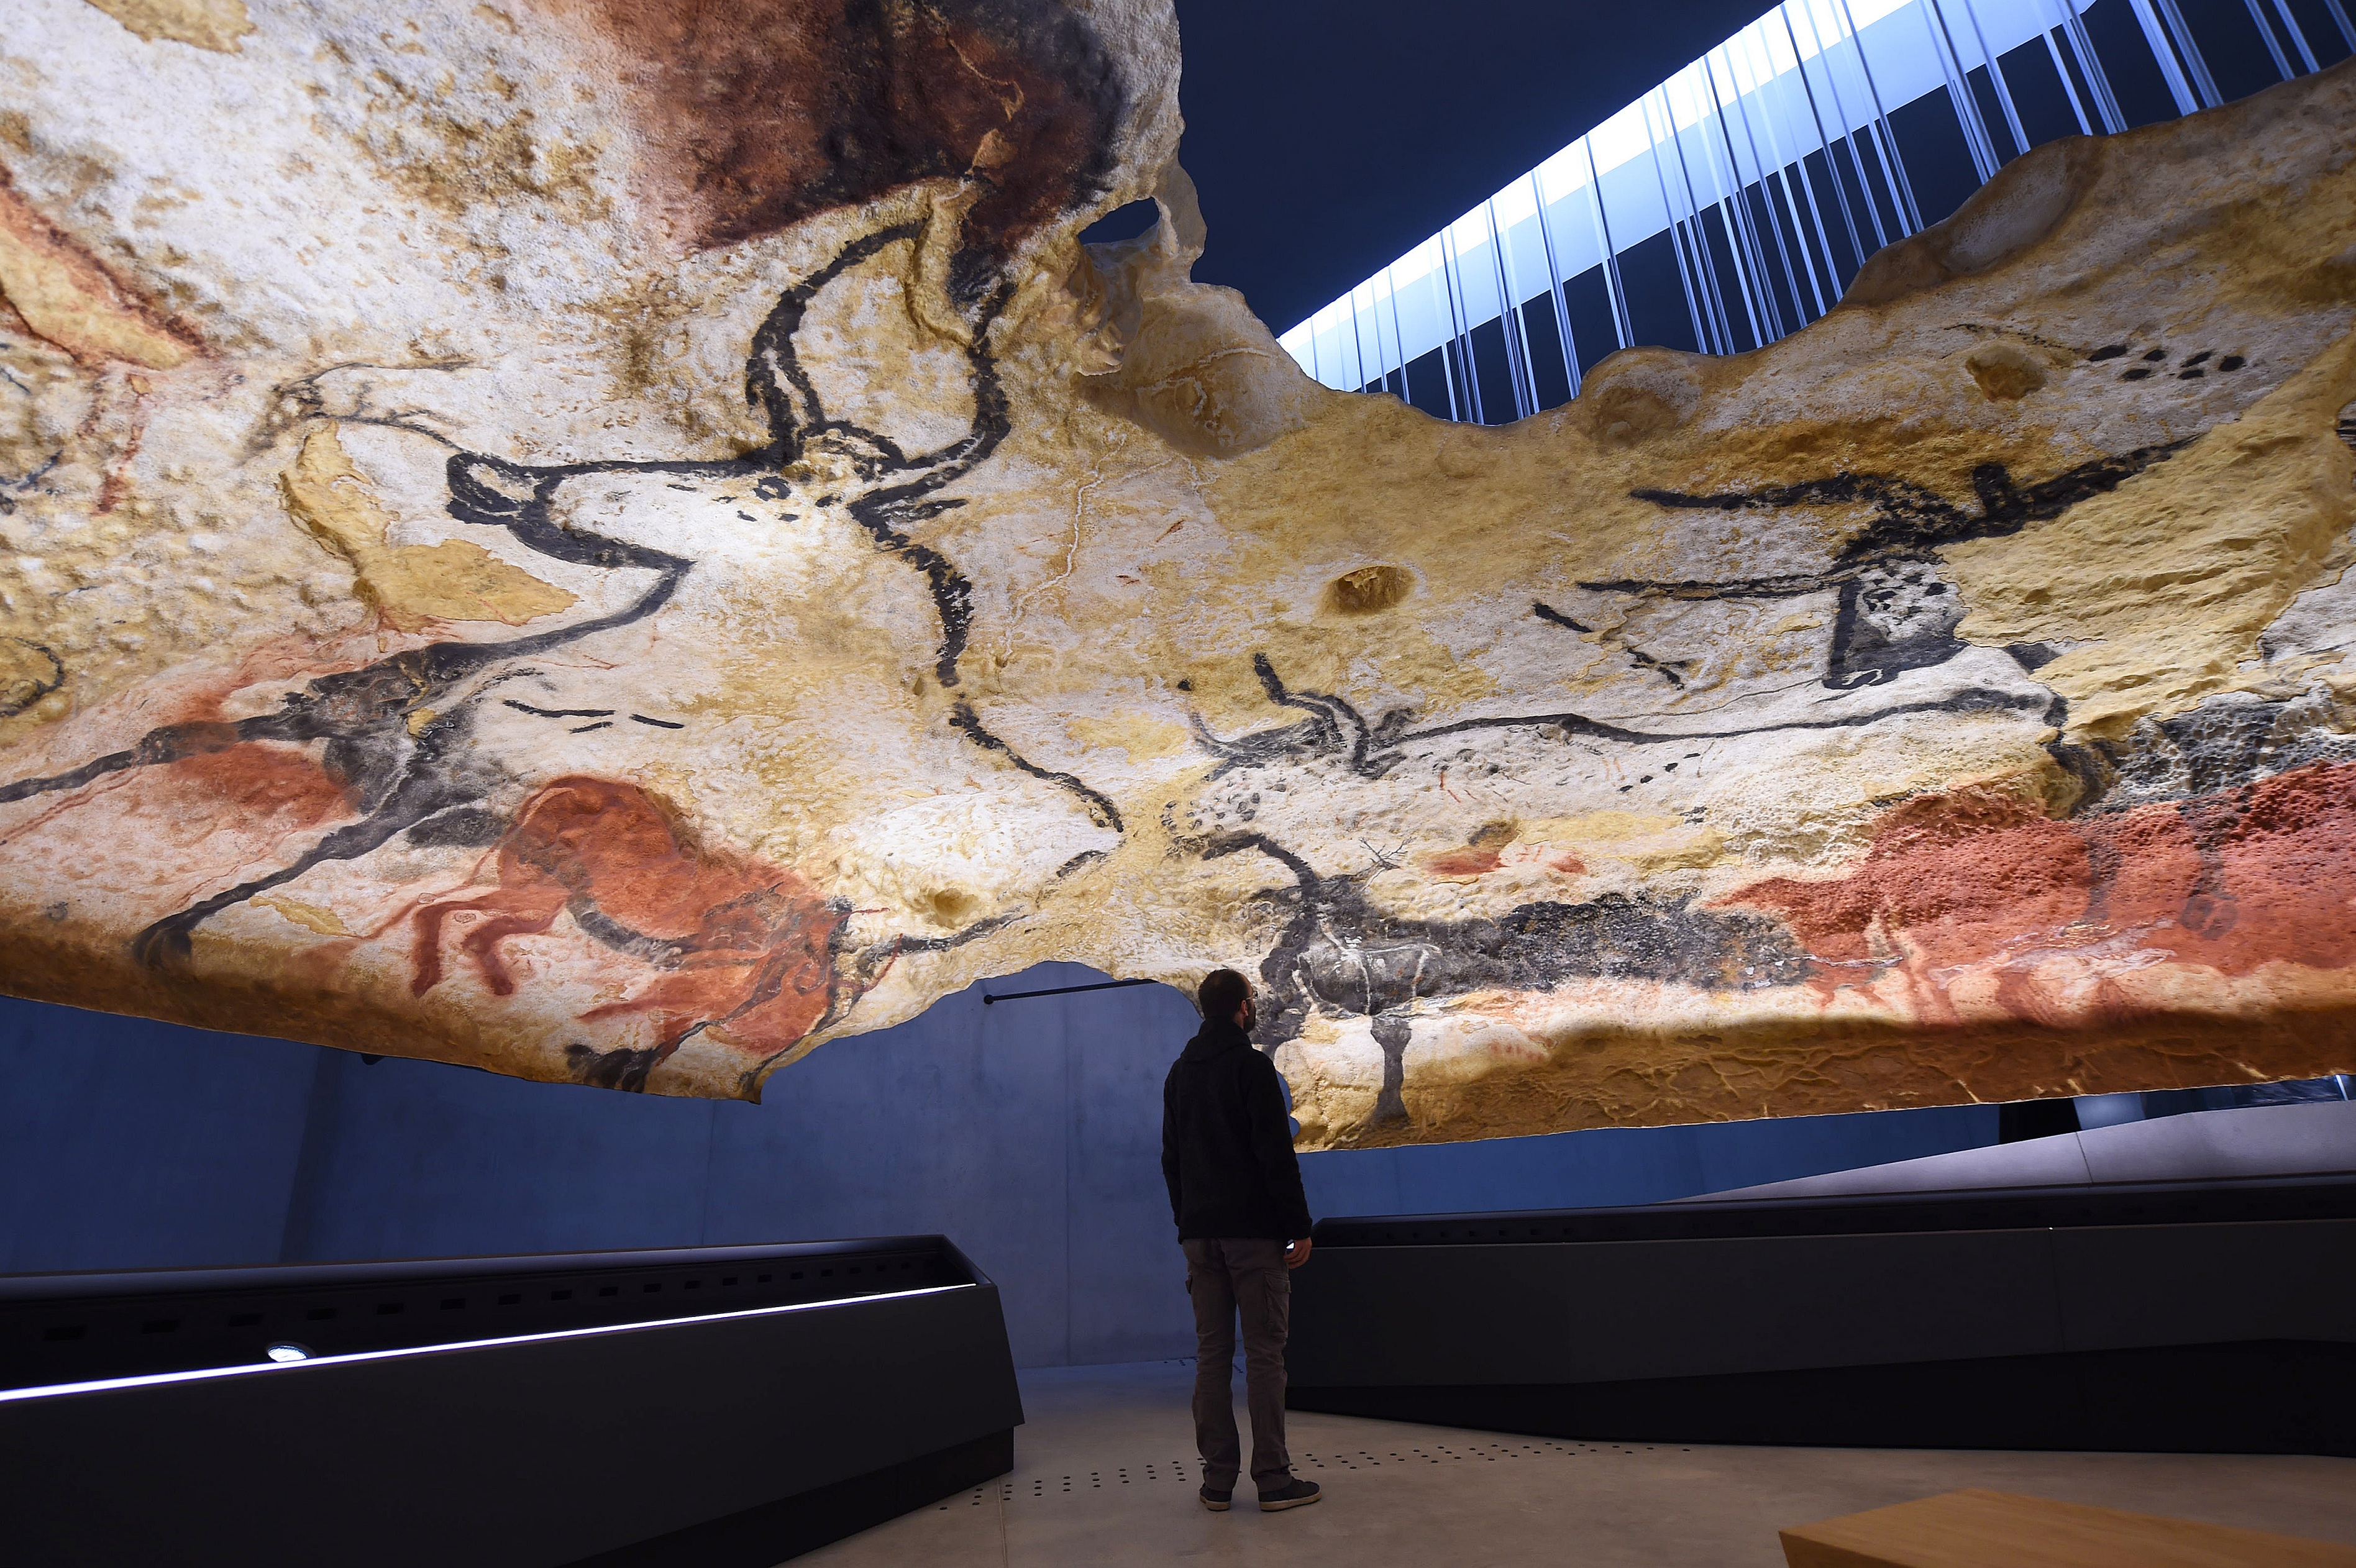 TO GO WITH AFP STORY BY JORDANE BERTRAND A person visits on November 28, 2016 a true-to-life replica of the renowned Lascaux's Stone Age cave with its Paleolithic paintings, in Montignac, southwestern France.  The cave of Lascaux is one of the largest decorated caves of the Paleolithic. The age of the paintings and engravings is estimated between about 18.000 and 17.000 years. Known as Lascaux 4, the first full replica of the Lascaux cave, reproduced identically by the Atelier des Fac-Similes du Perigord for a 66-million euros cost, before being mounted in the International Centre of the parietal art of Montignac-Lascaux, will opened on December 10, 2016.  / AFP PHOTO / MEHDI FEDOUACH